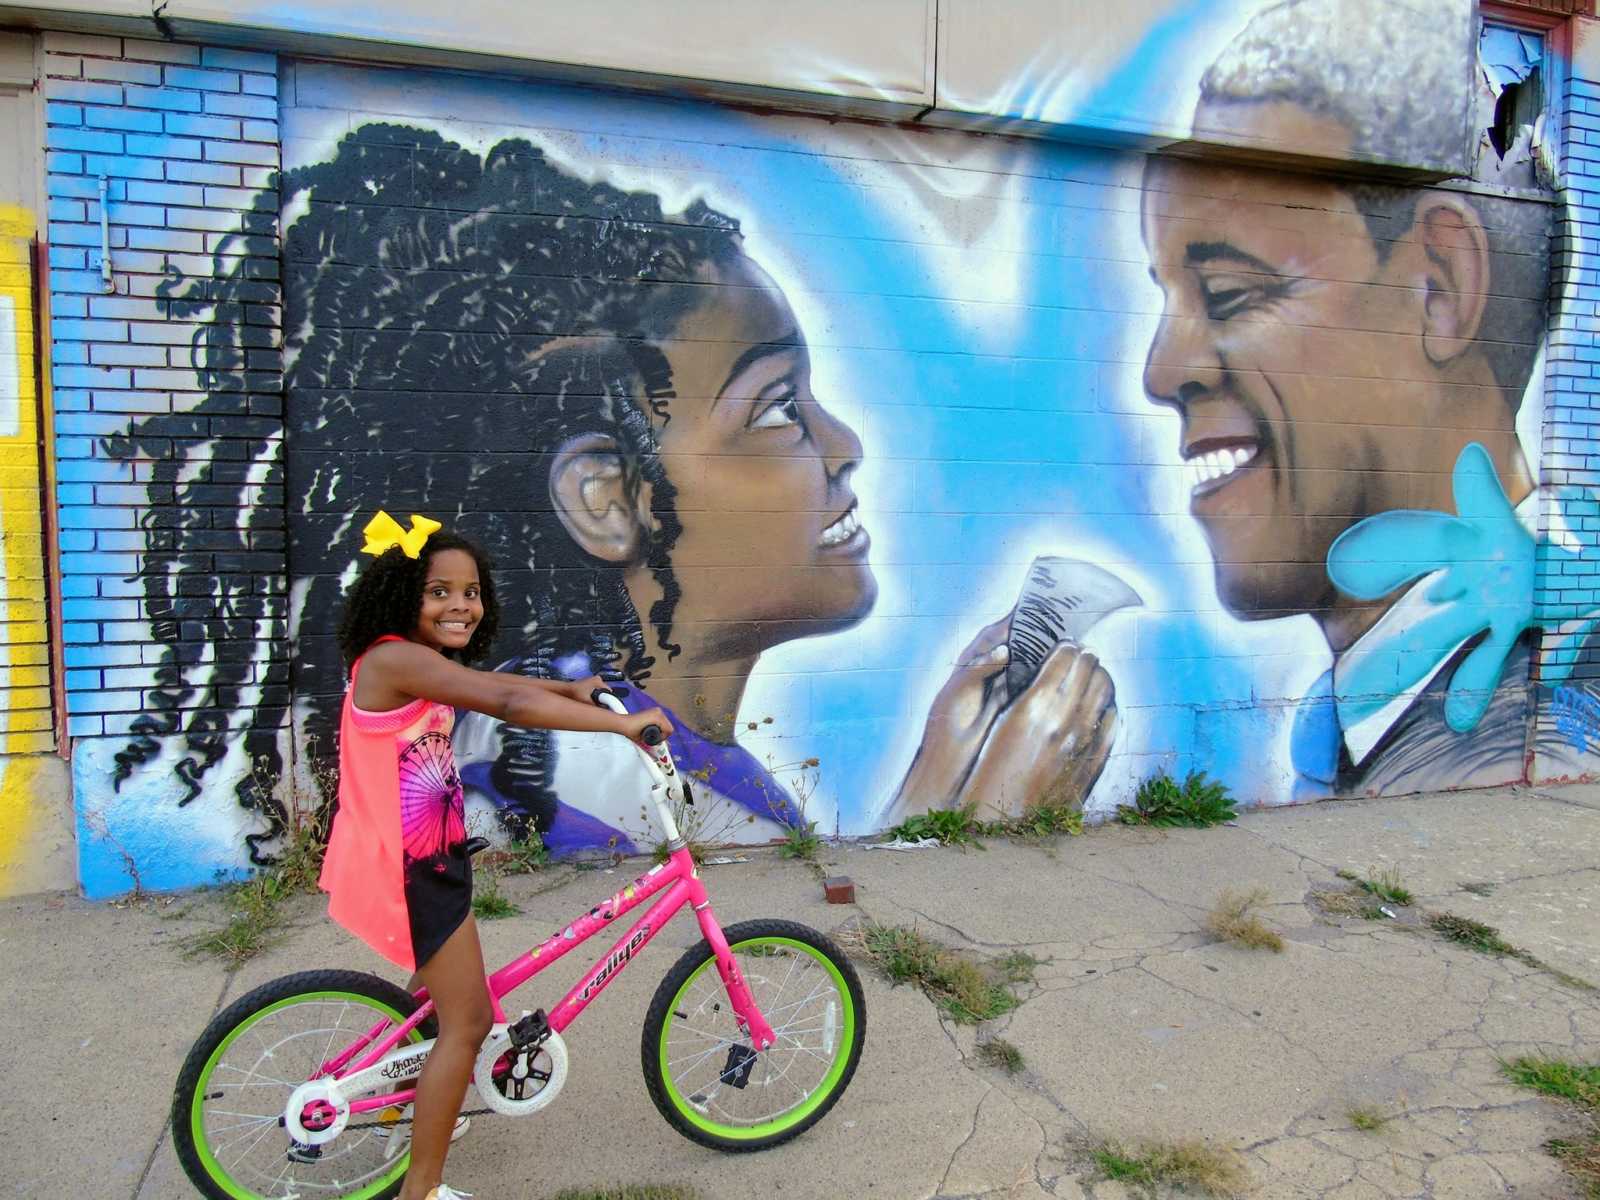 Little girl in Flint, Michigan smiling on her bike in front of mural of a girl handing something to Barack Obama